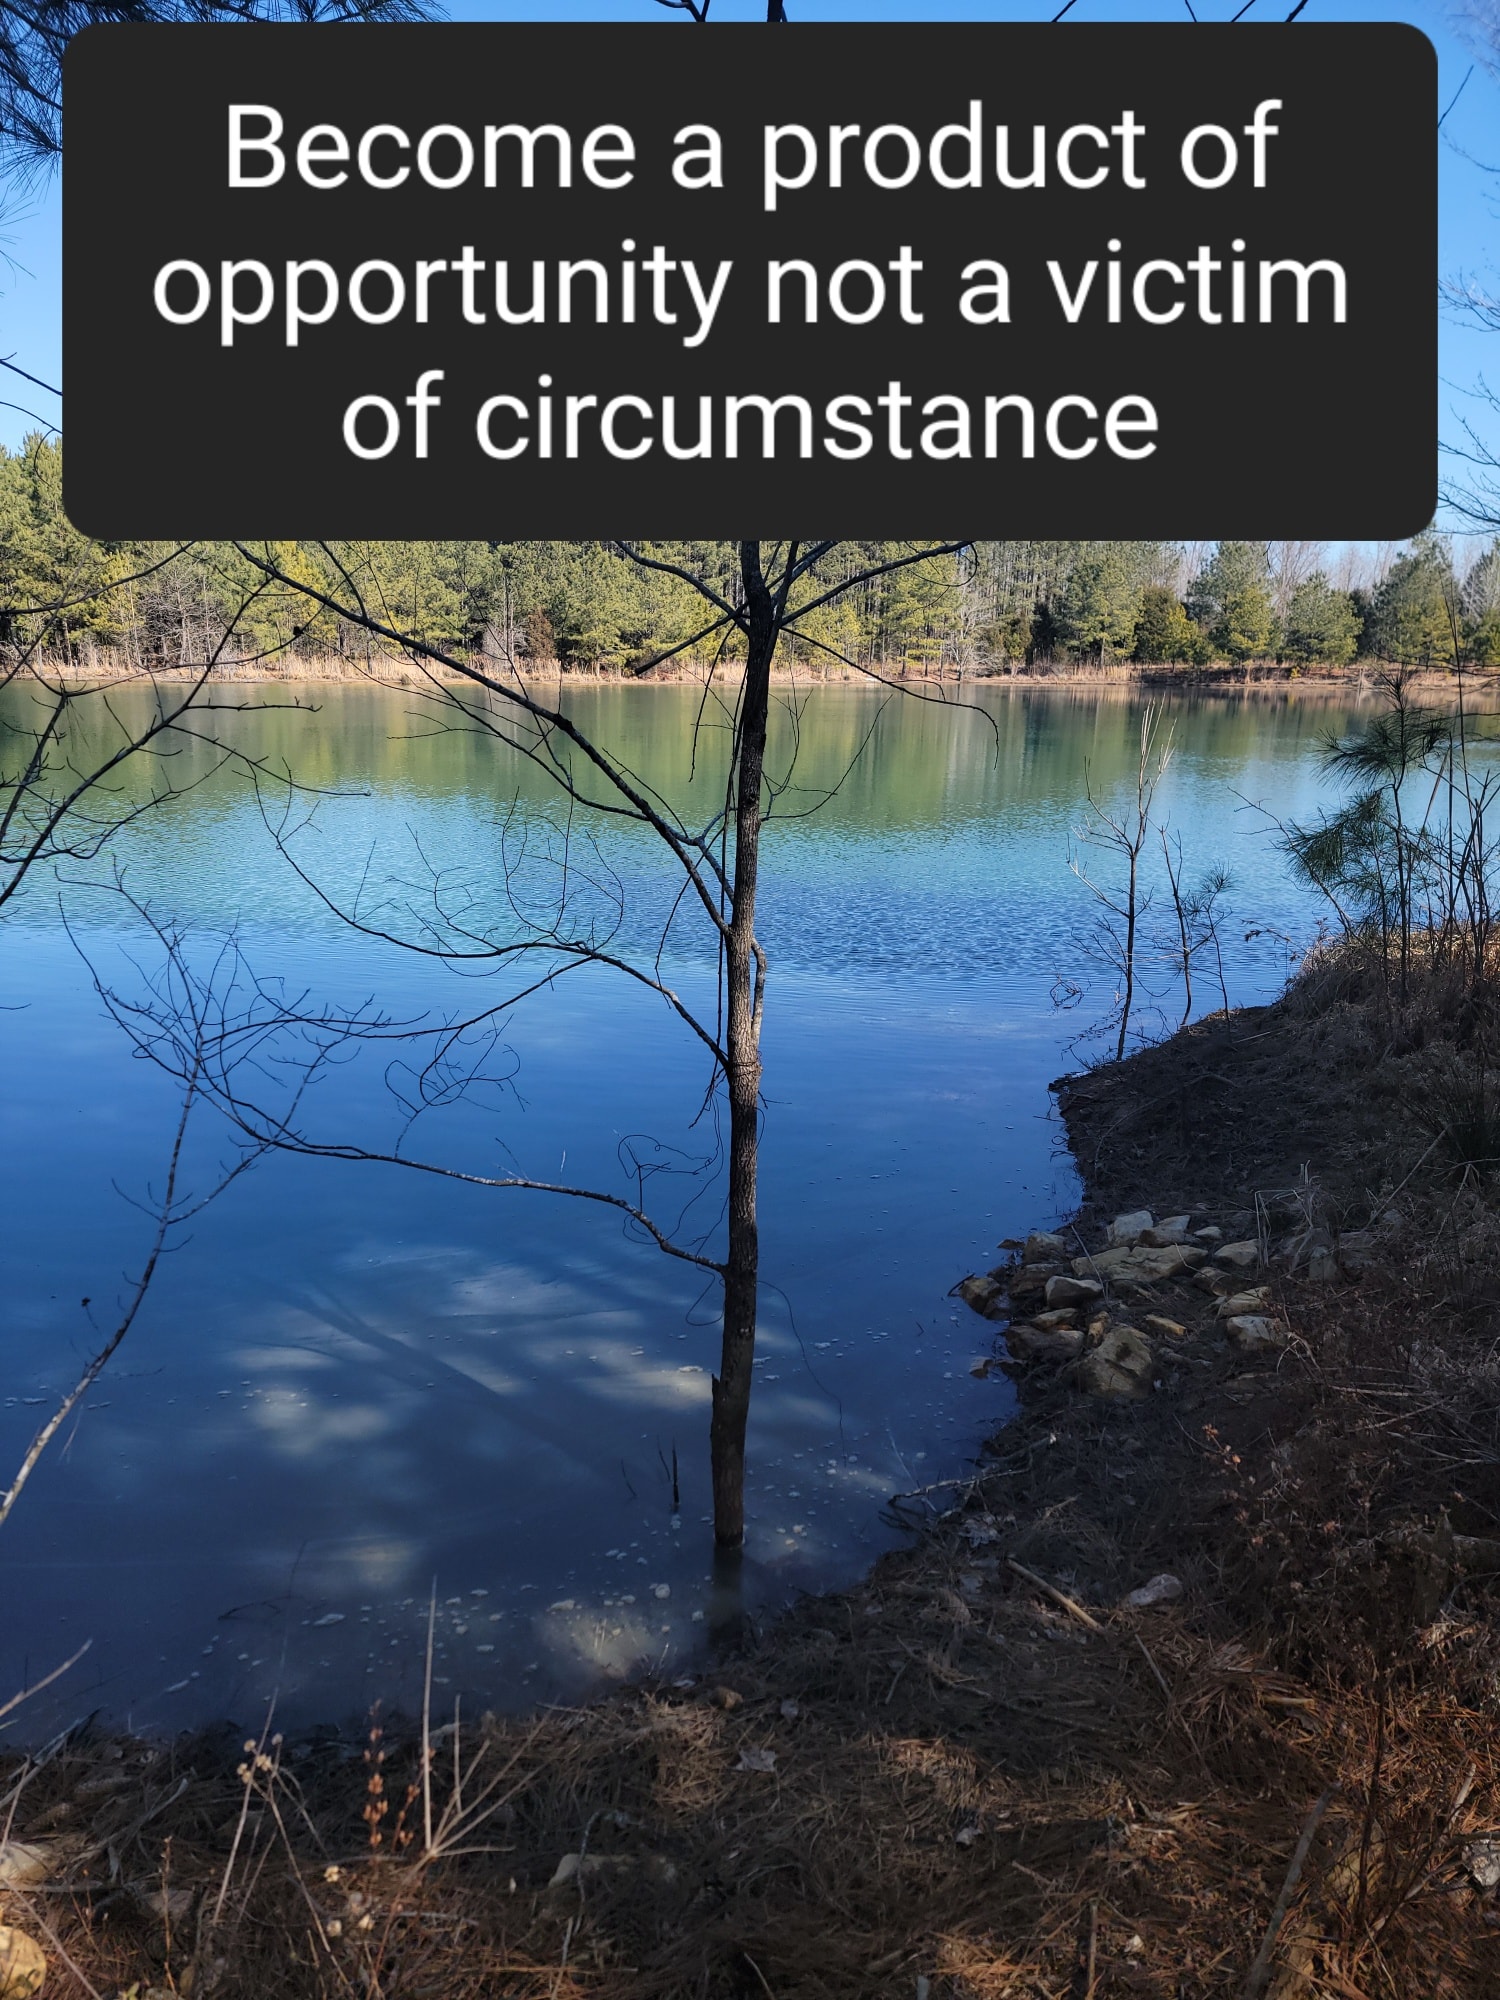 a photo of a sapling in water with a quote Become a product of opportunity not a victim of circumstance